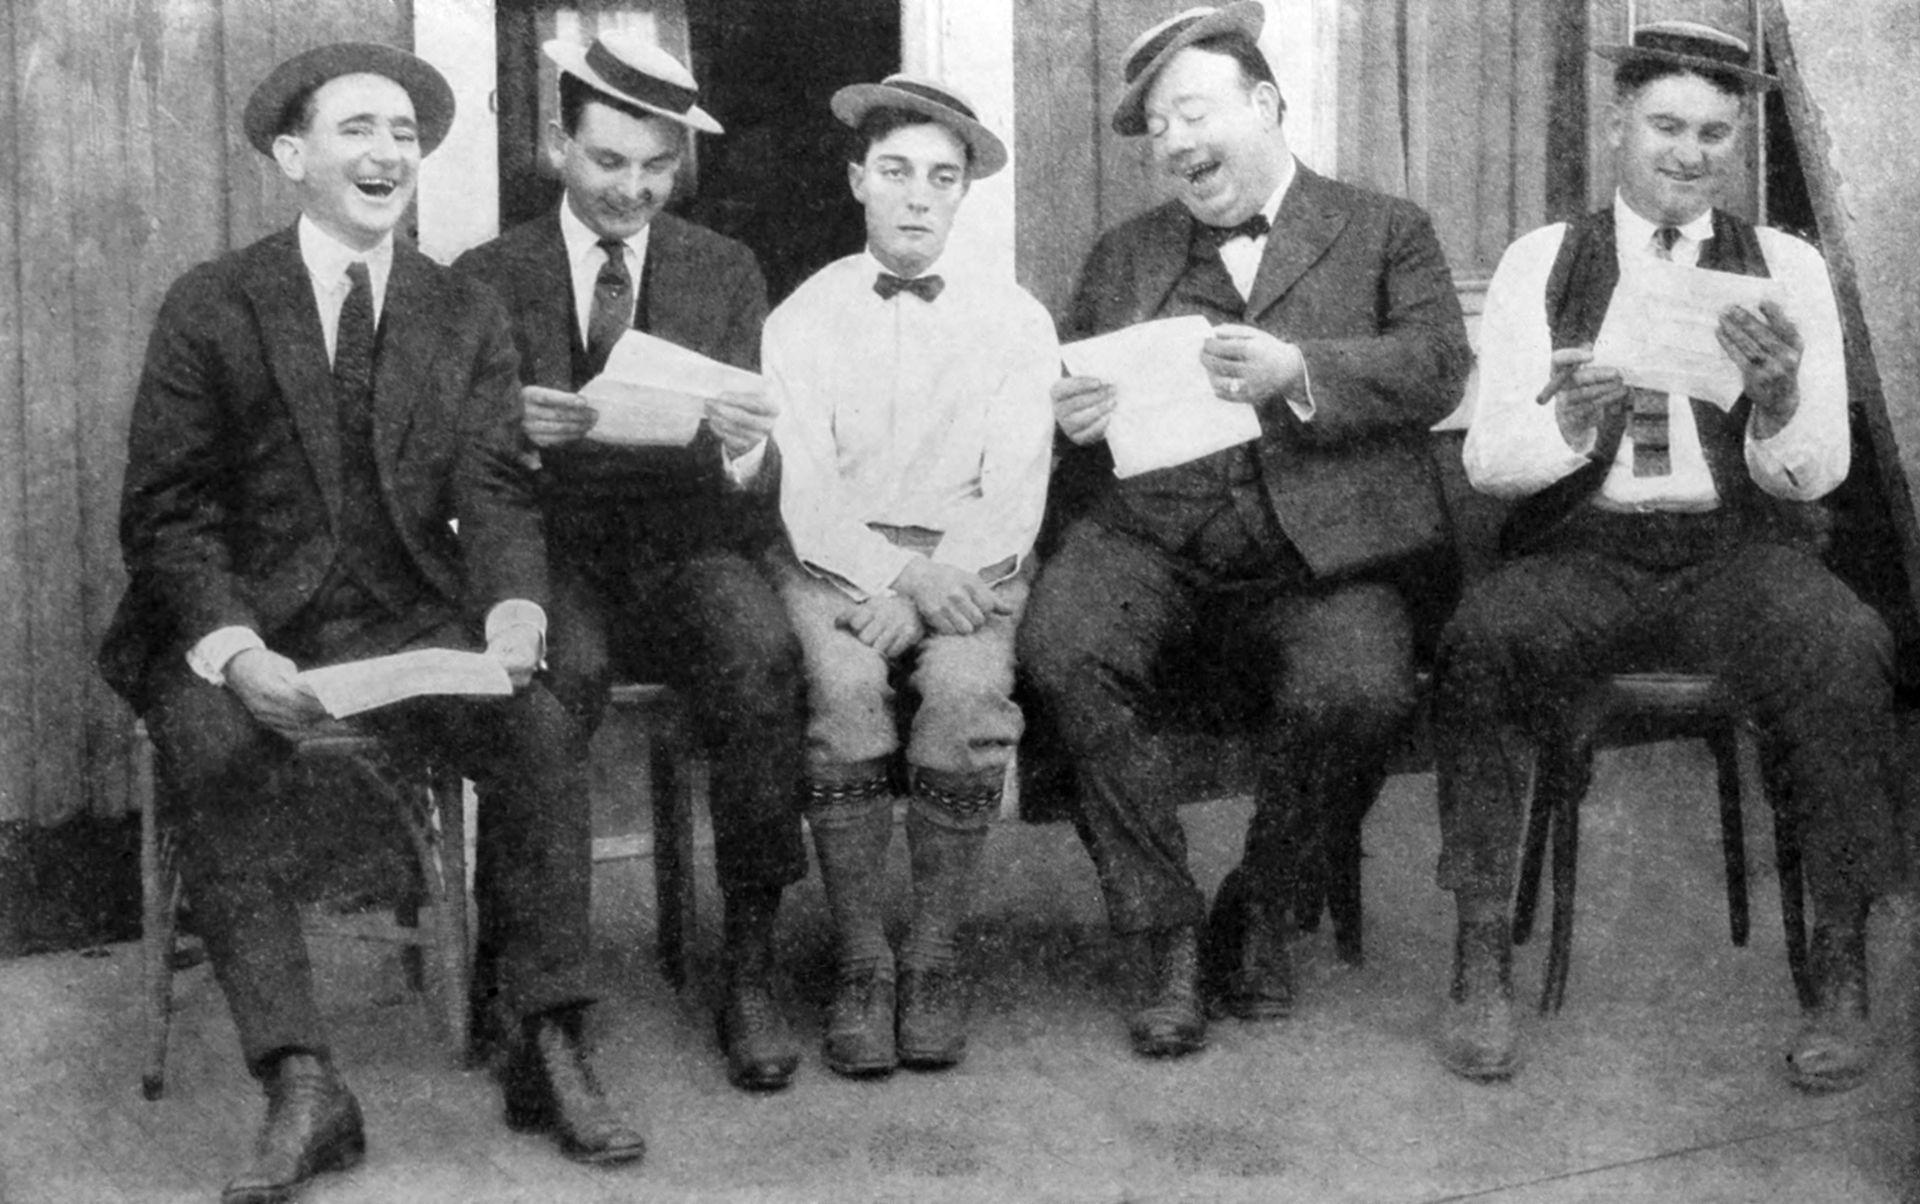 Buster Keaton and his writers in 1923. I Image: Wikimedia Commons.